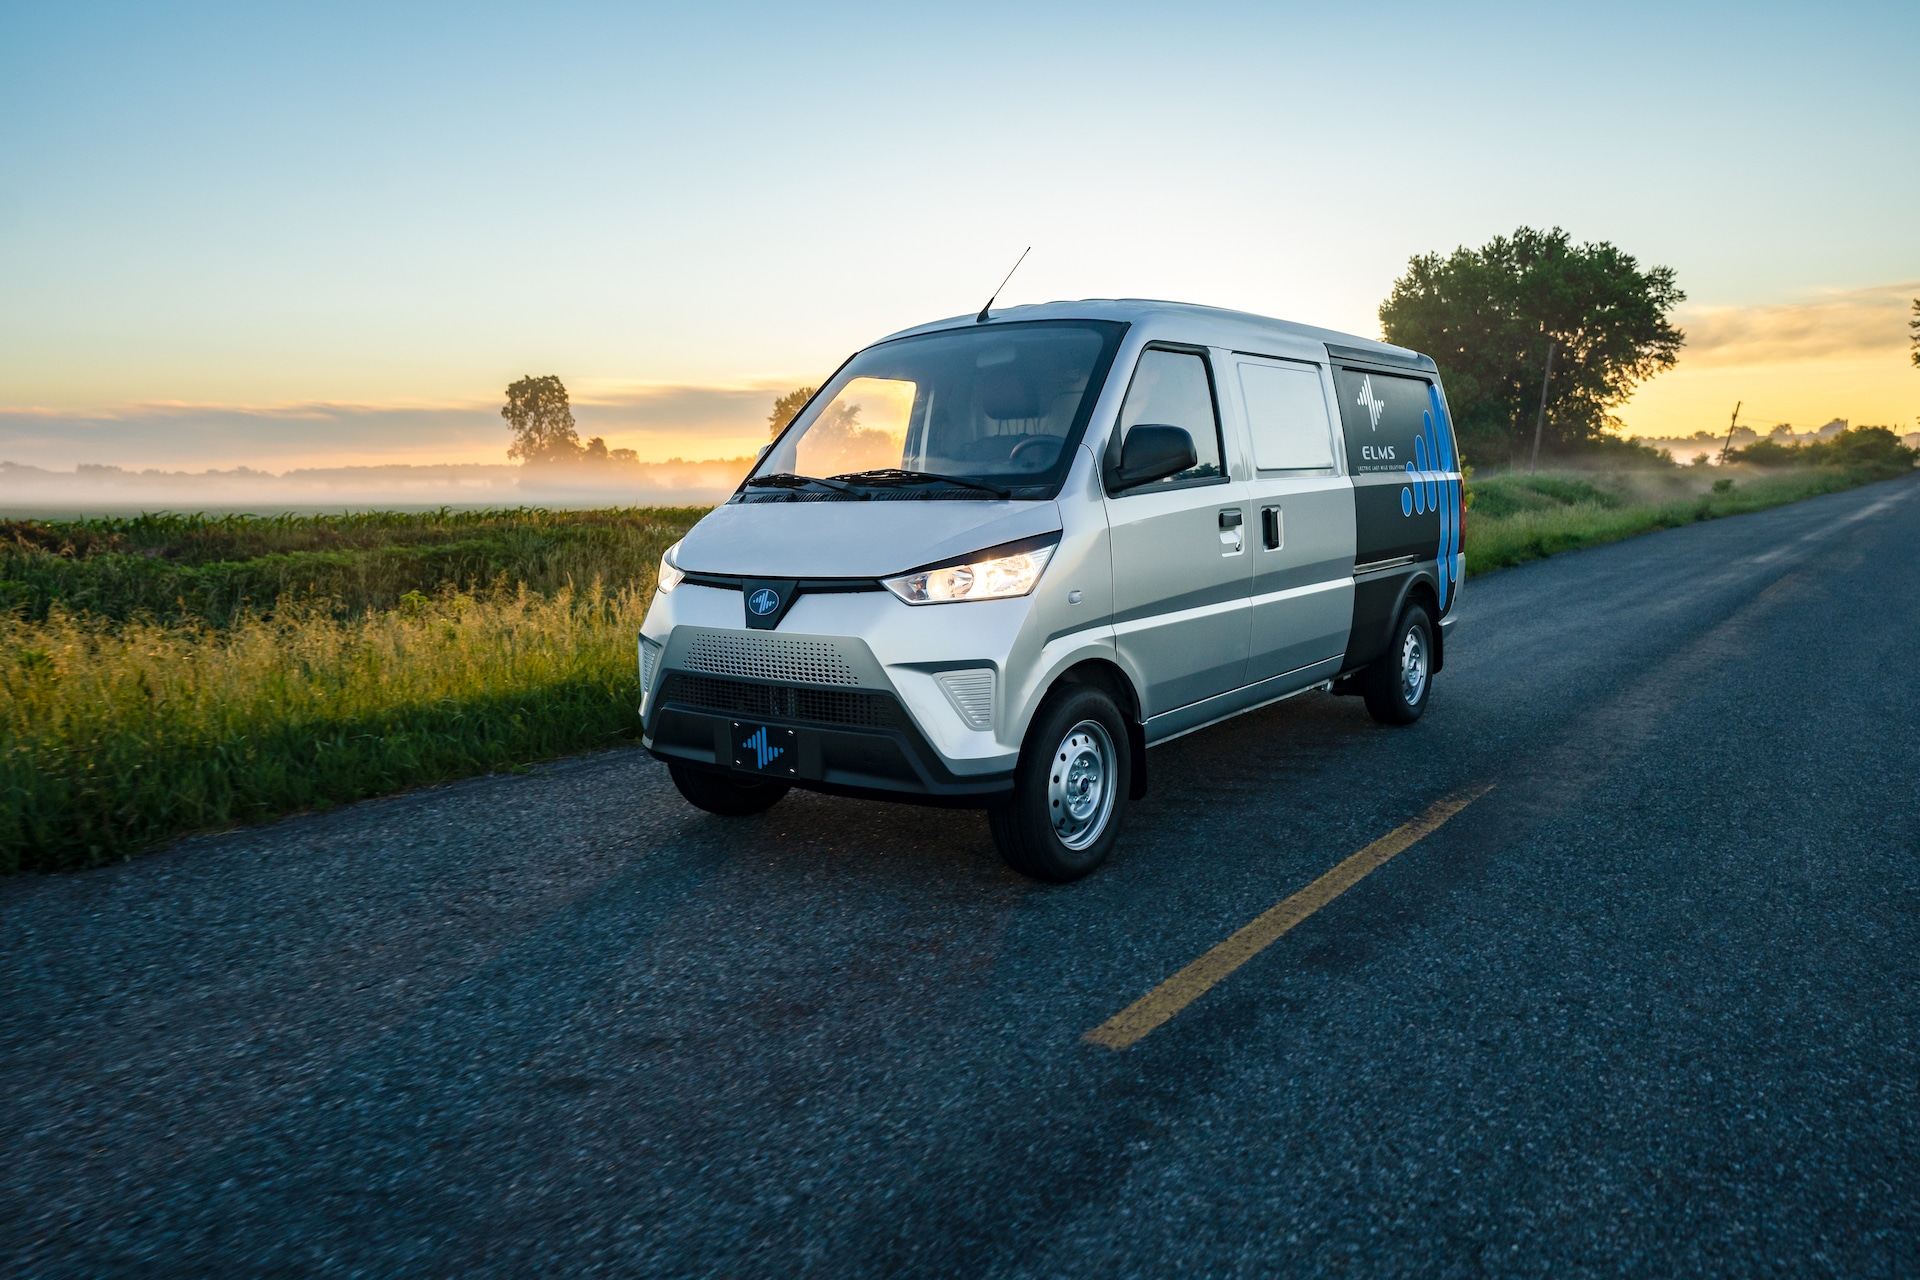 ZEEBA SELECTS ELMS FOR ITS FIRST ORDER OF COMMERCIAL ELECTRIC VEHICLES